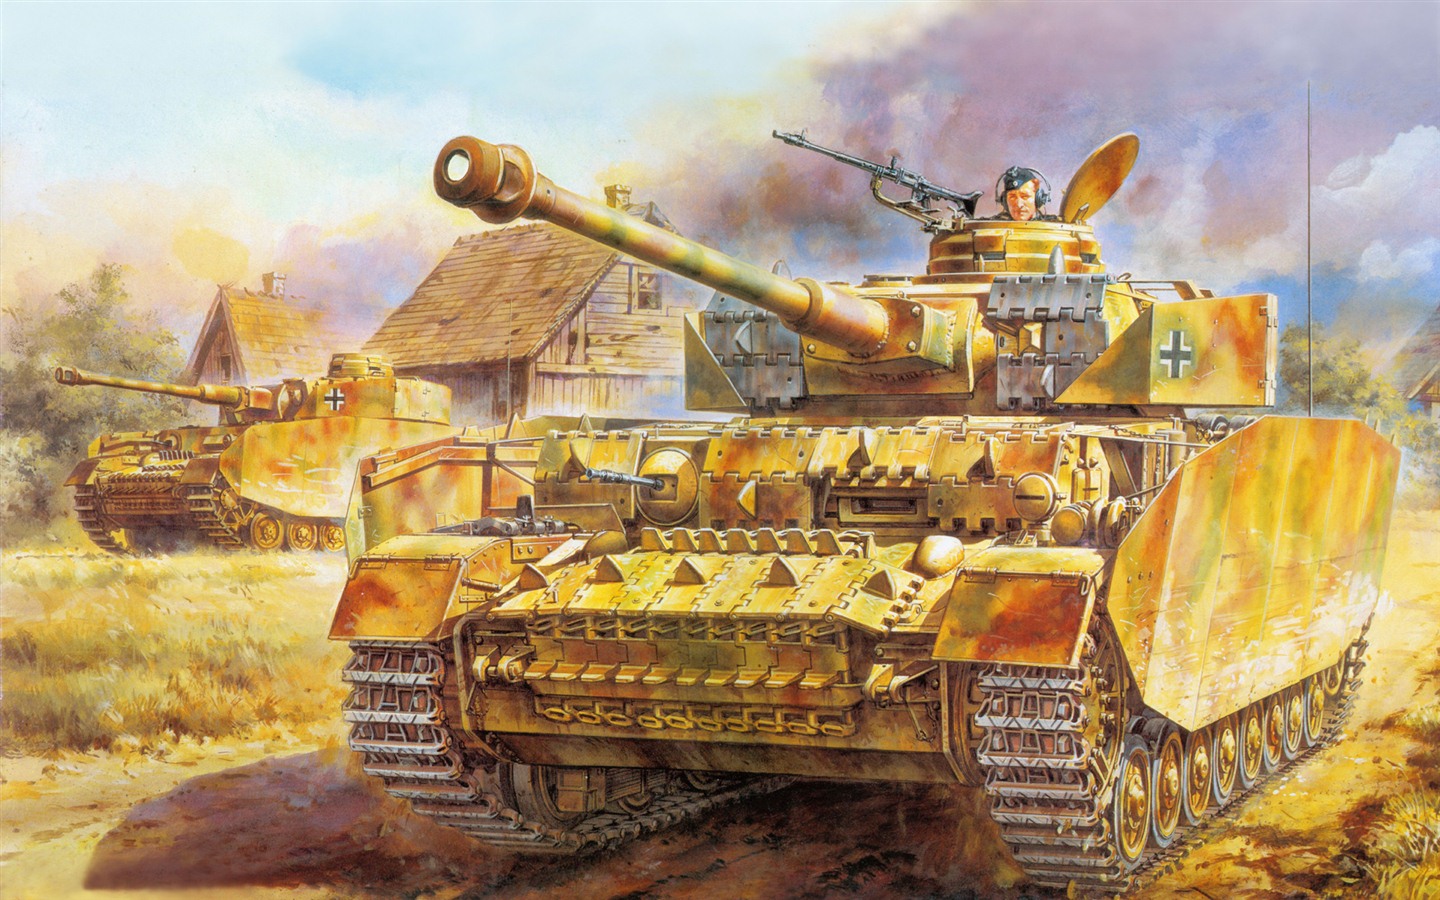 Military tanks, armored HD painting wallpapers #13 - 1440x900